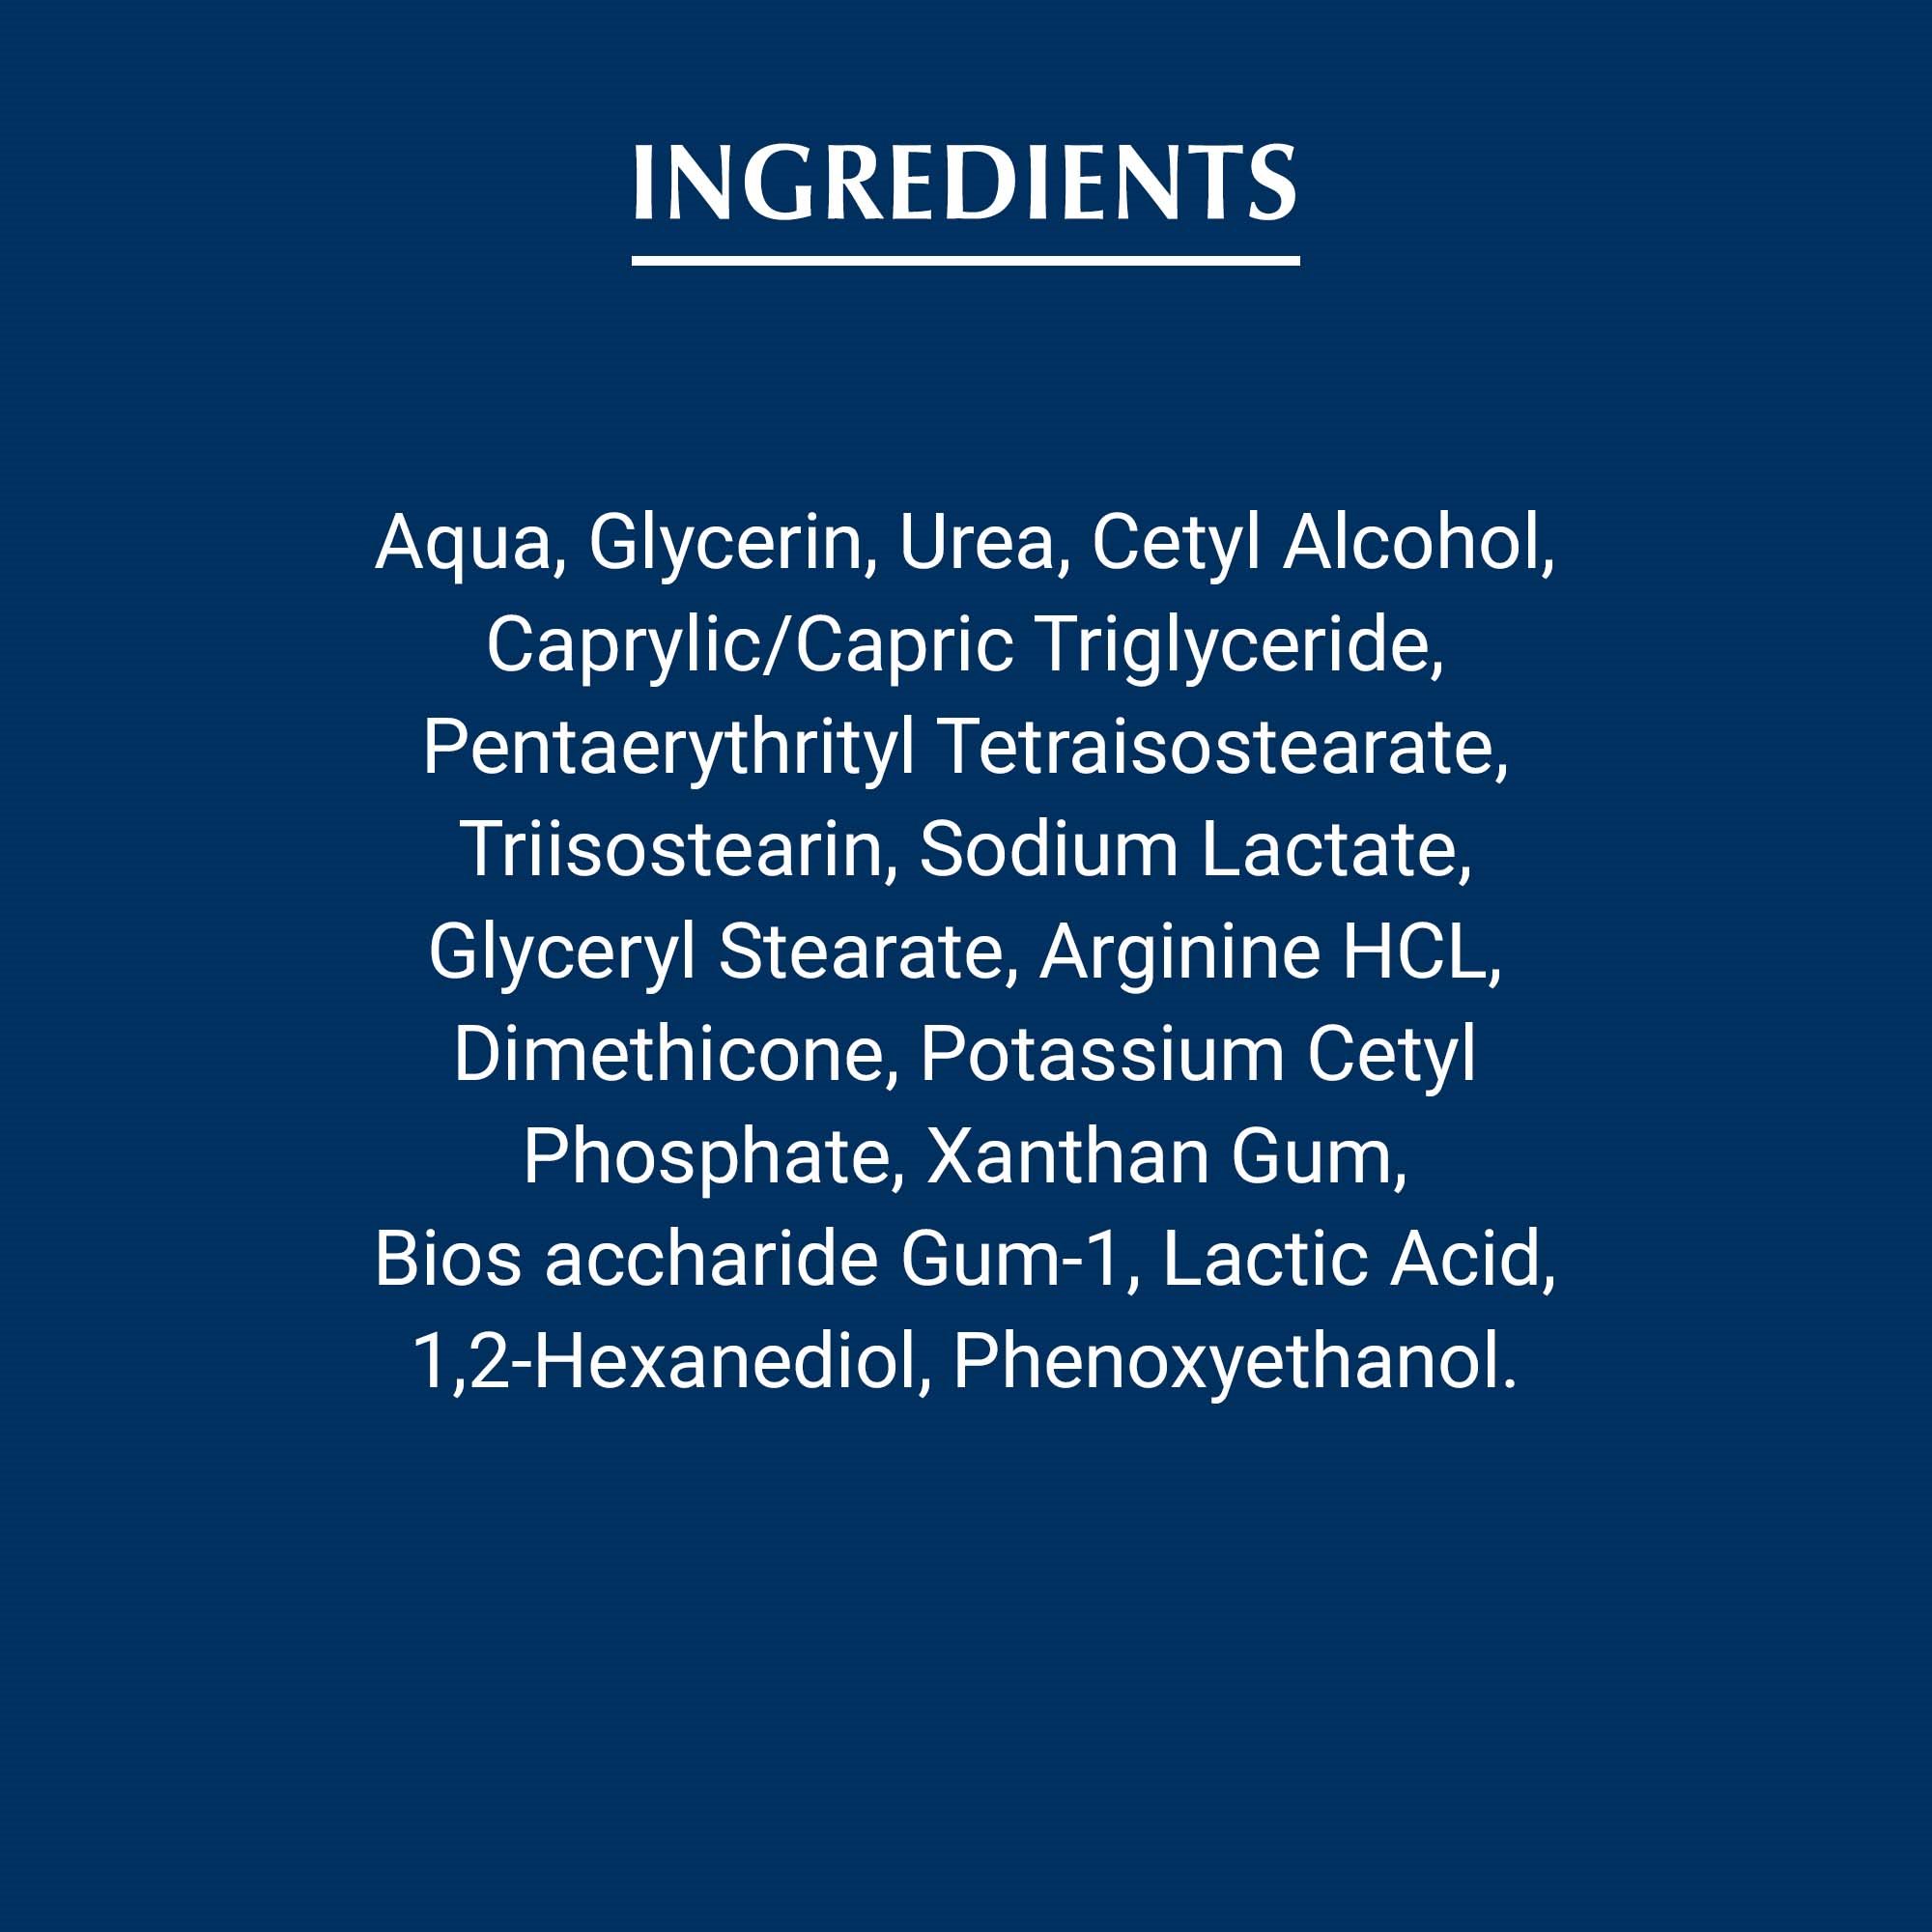 View of Eucerin Urea Repair replenishing face cream ingredients text against a blue background.